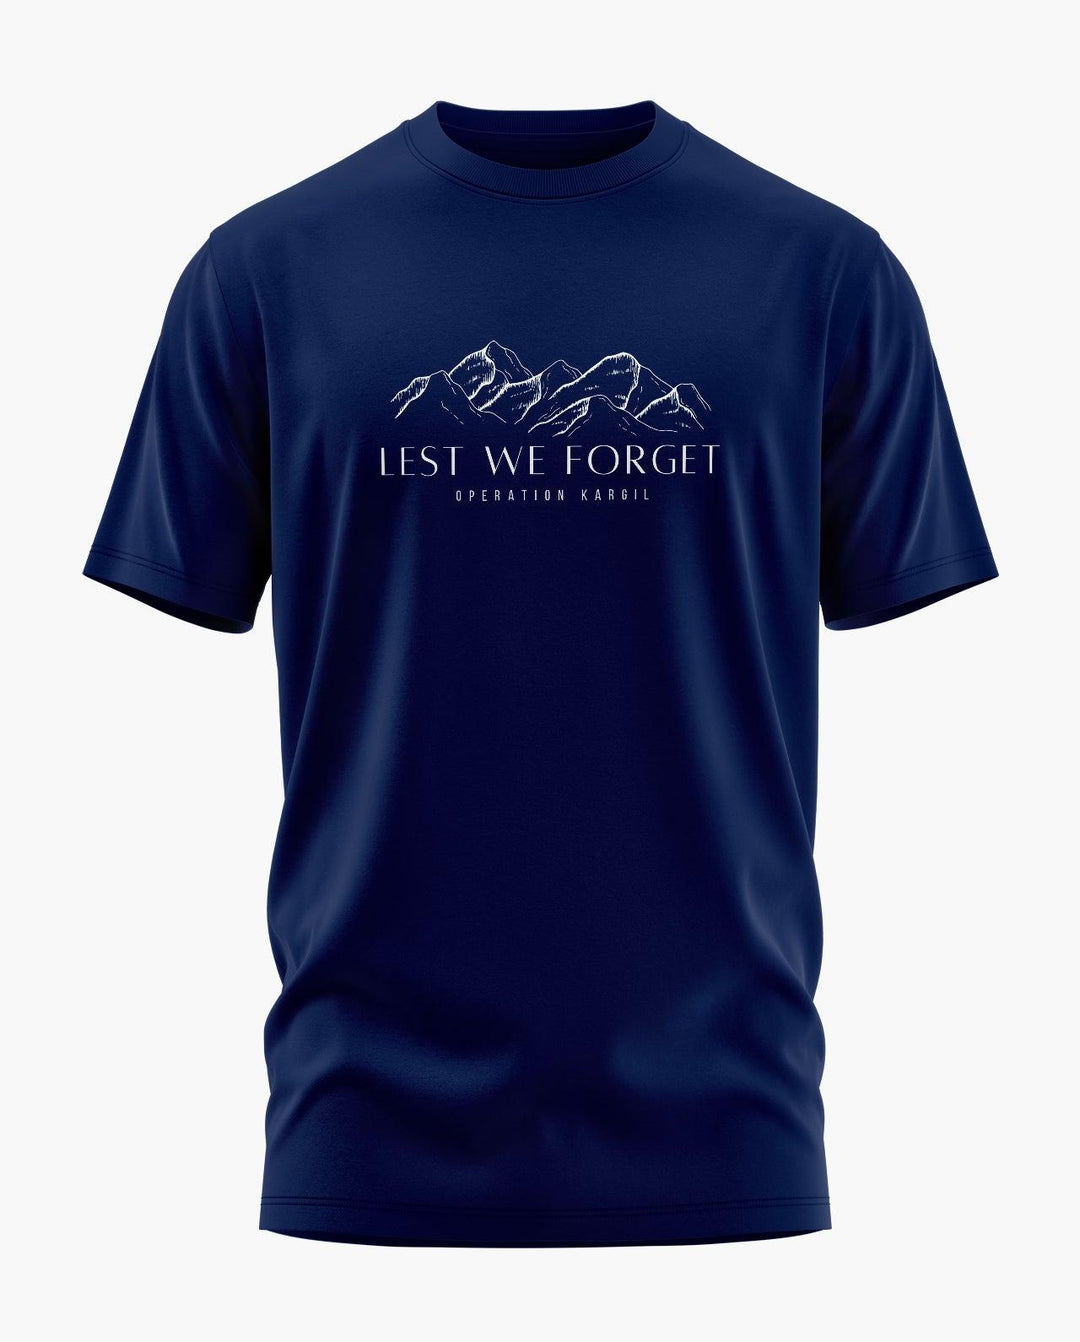 Lest We Forget T-Shirt - Aero Armour